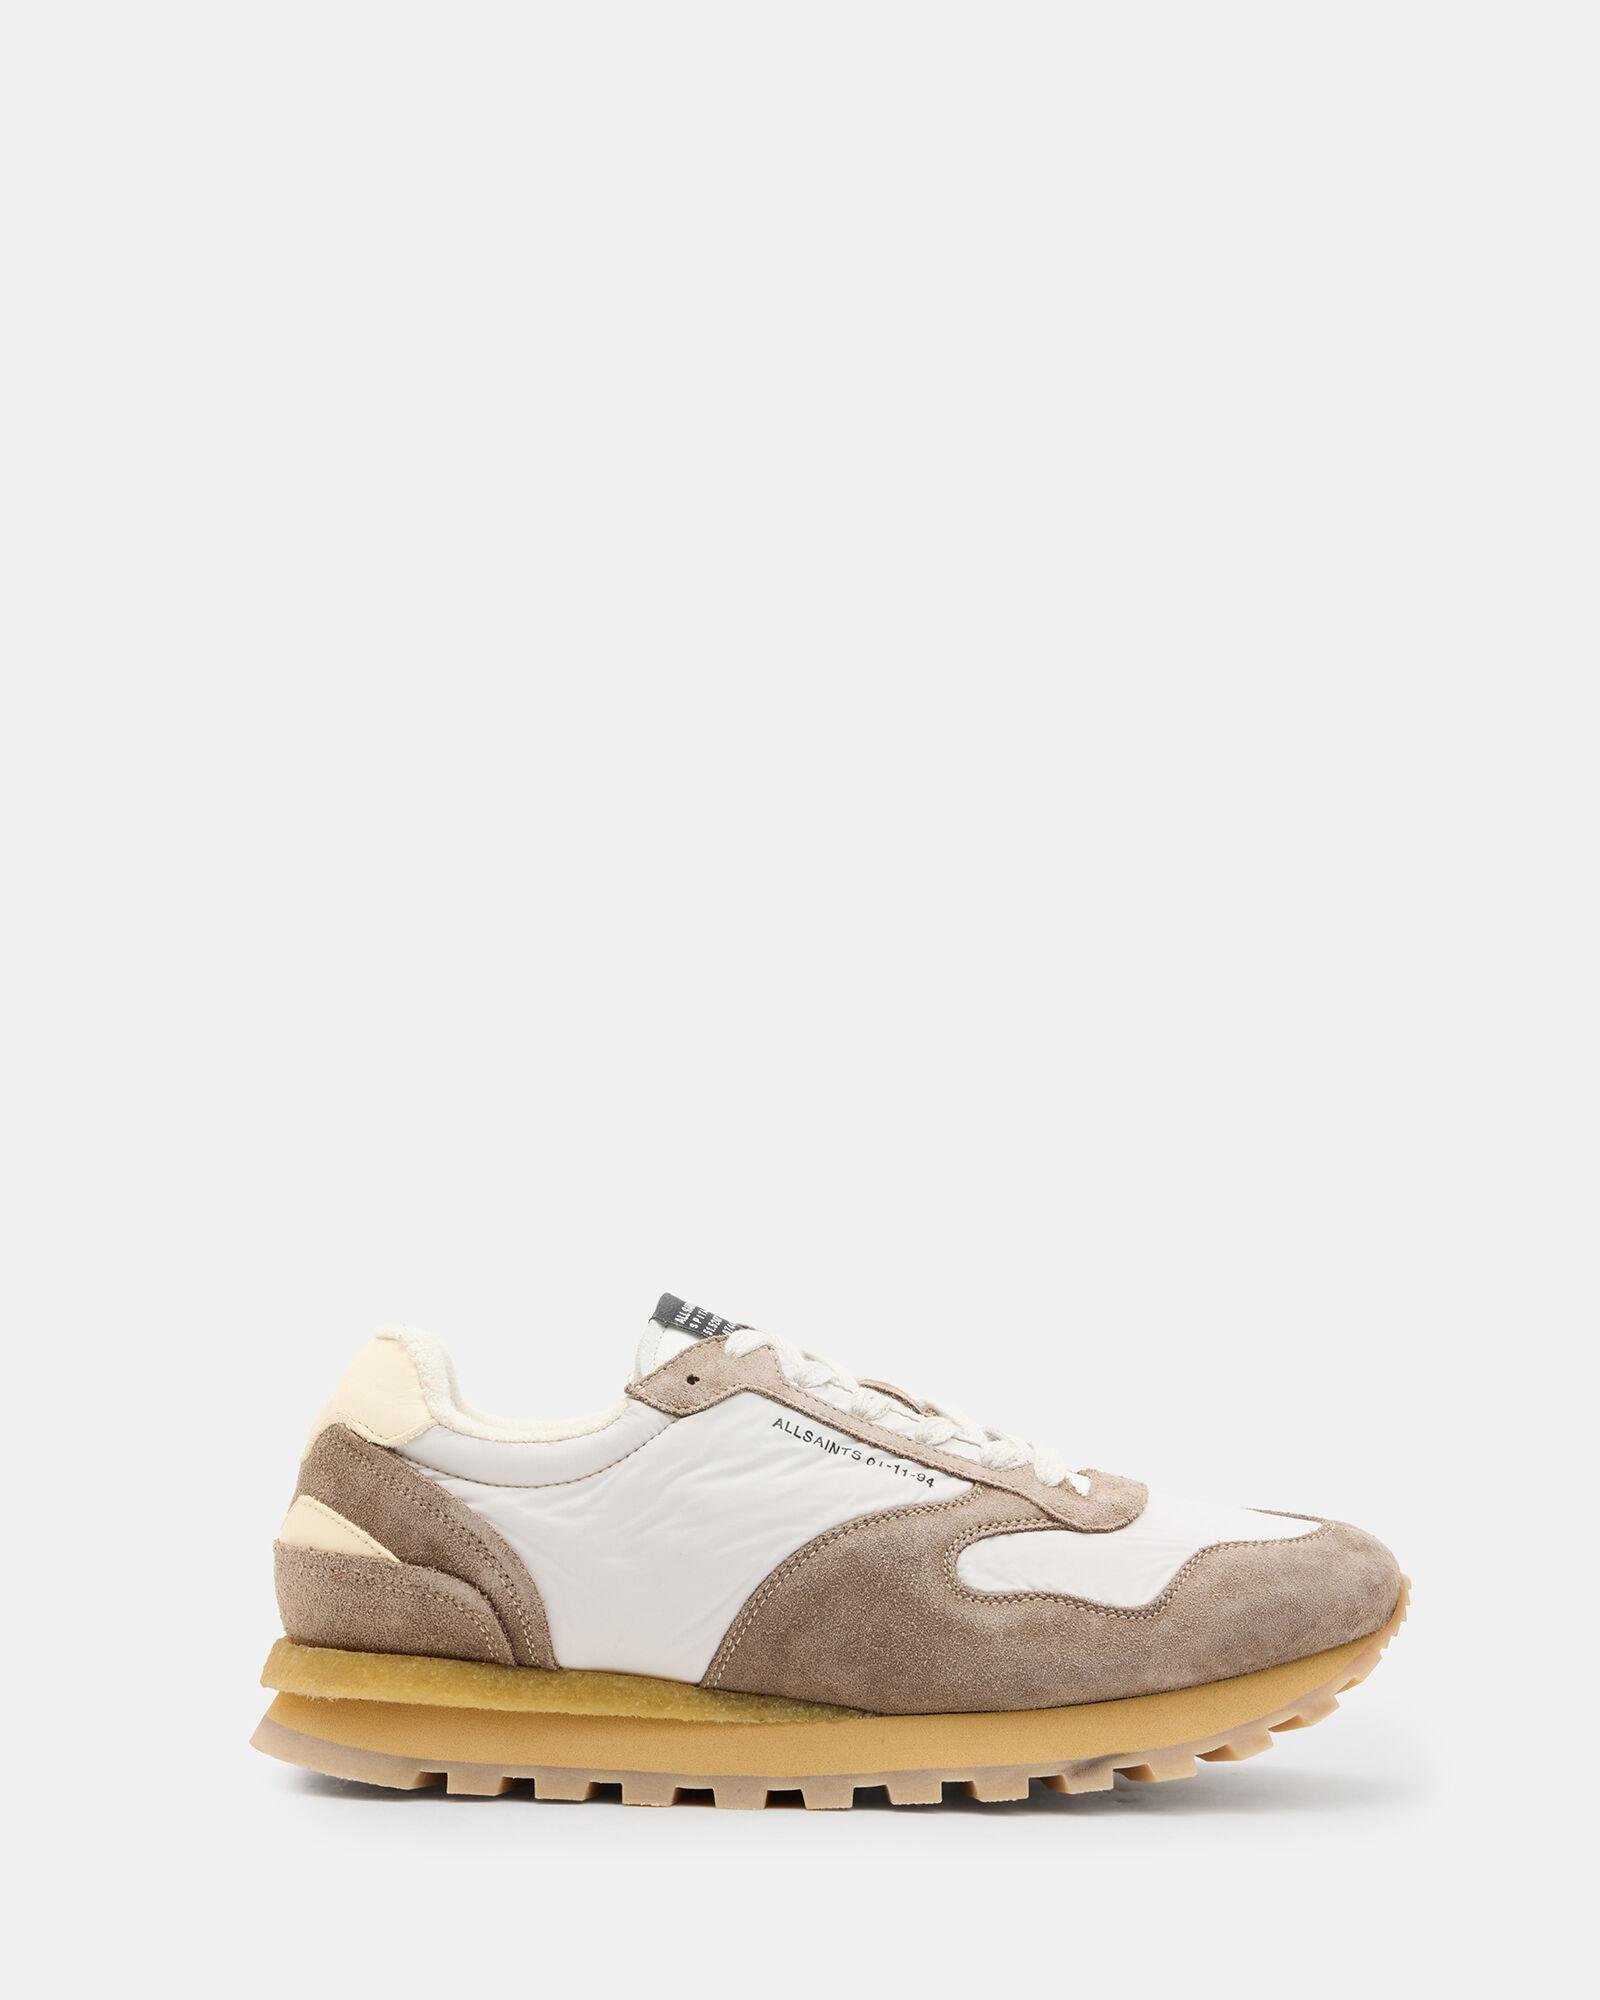 Rimini Leather Lower Top Sneakers by ALLSAINTS